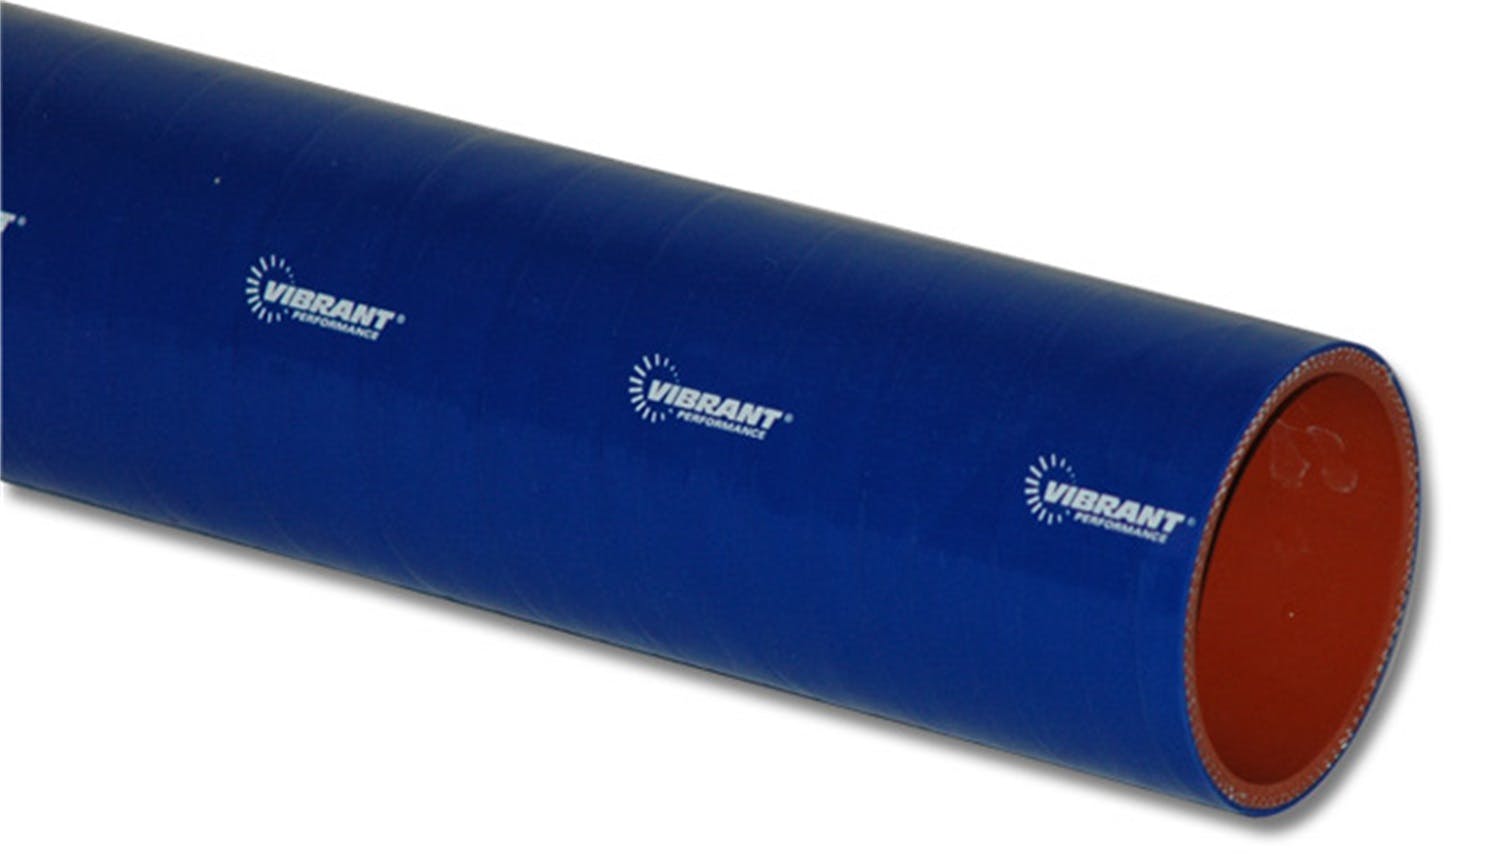 Vibrant Performance 27011B 4 Ply Silicone Sleeve, 1 inch I.D. x 12 inch Long - Blue